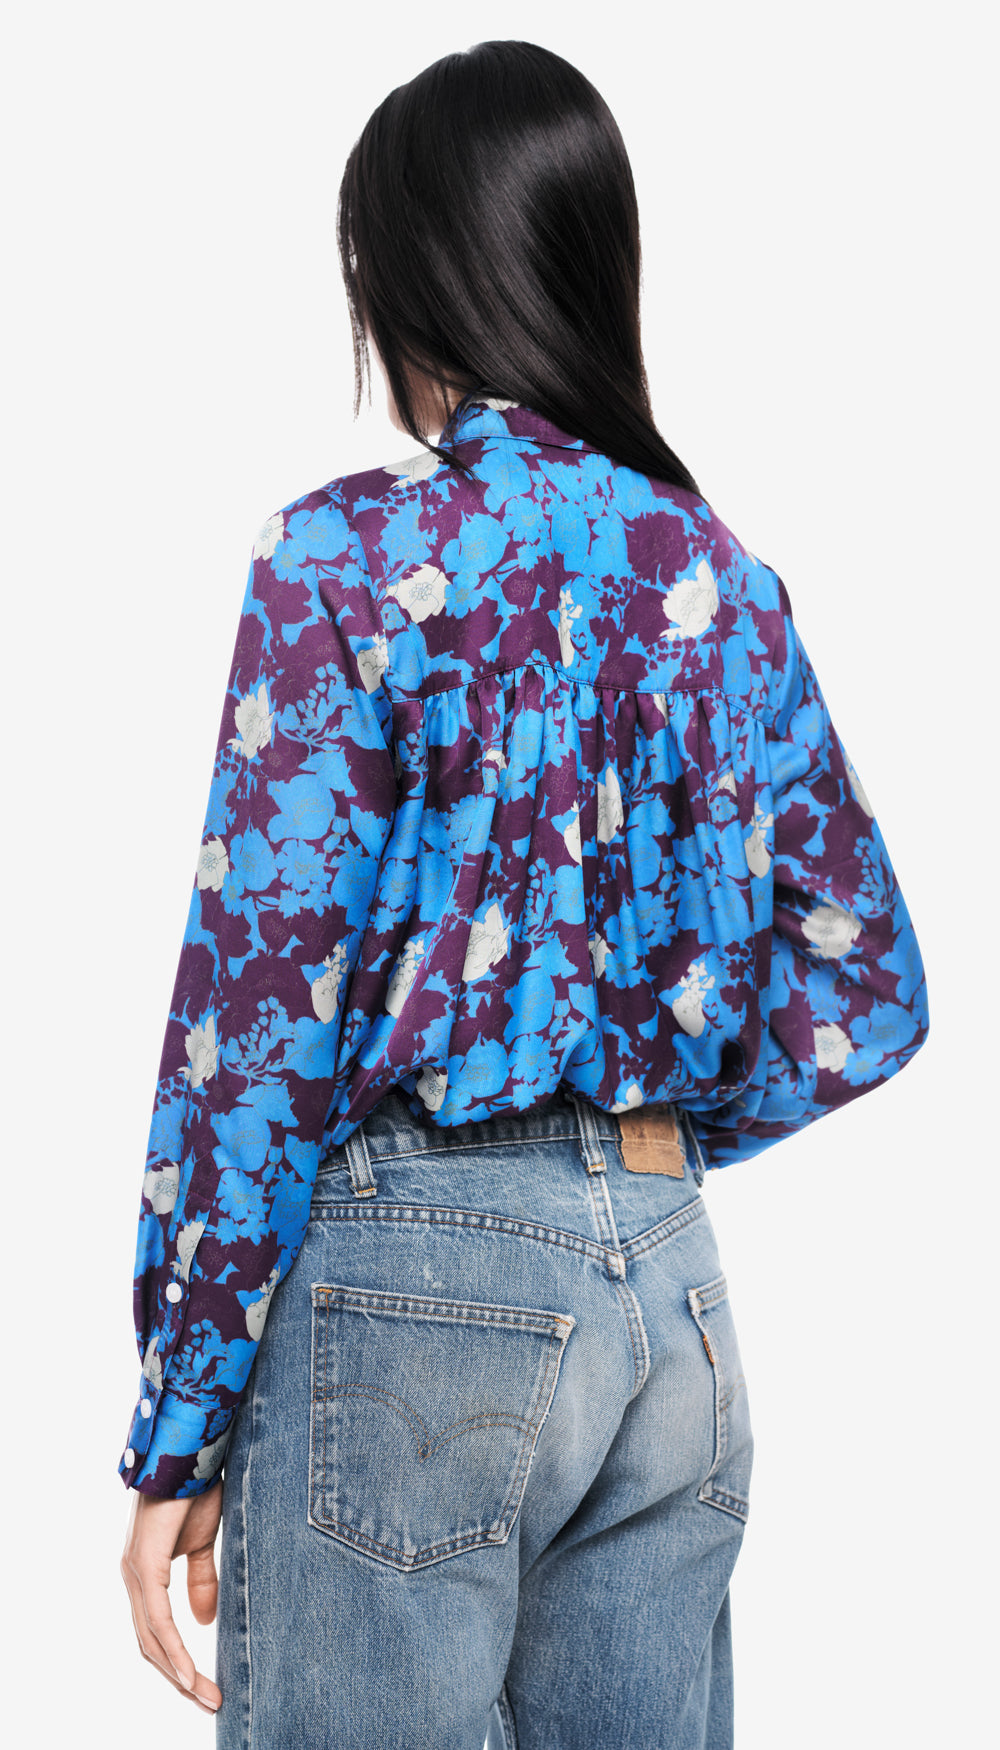 The back of a woman in a blue and purple floral blouse.